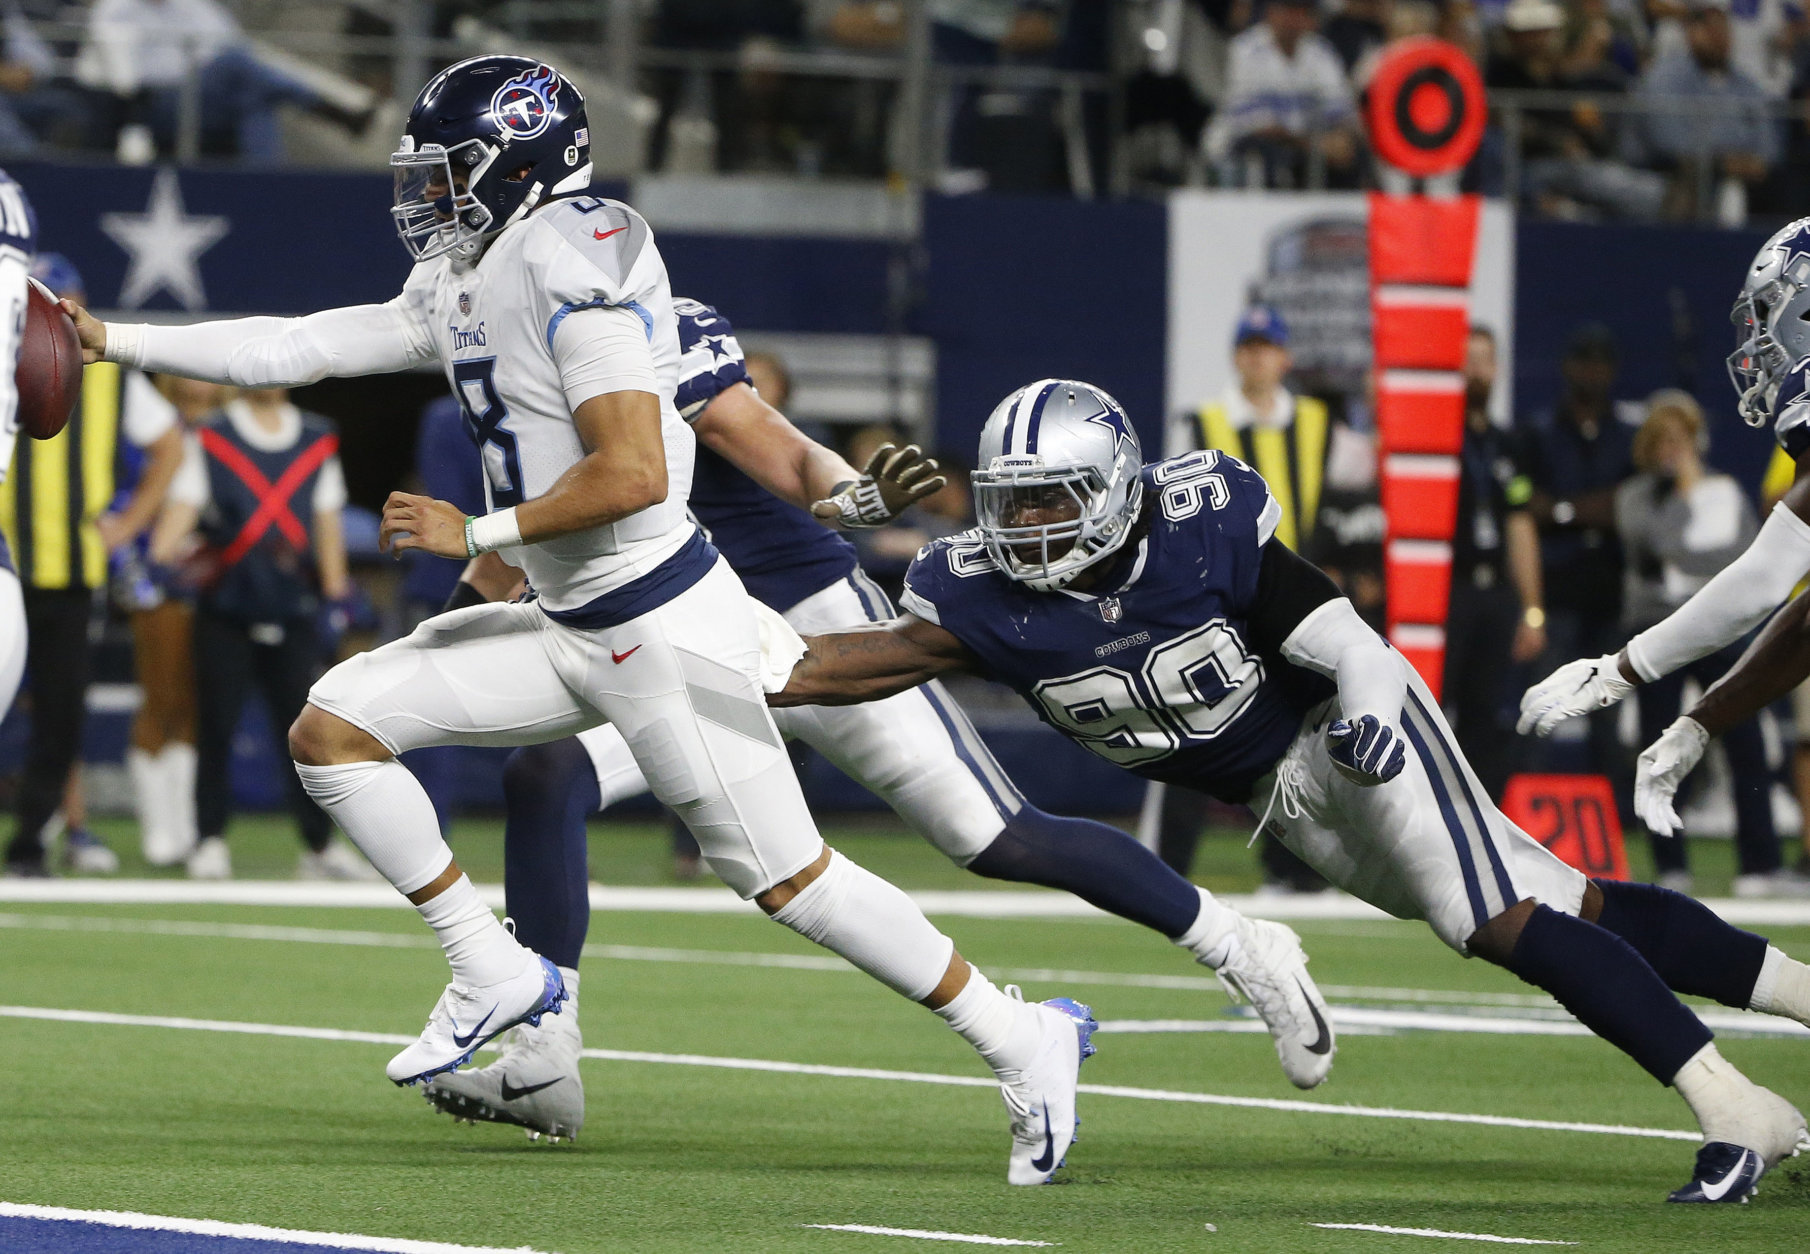 Tennessee Titans quarterback Marcus Mariota (8) runs for a touchdown against Dallas Cowboys defensive end Demarcus Lawrence (90) during the second half of an NFL football game, Monday, Nov. 5, 2018, in Arlington, Texas. (AP Photo/Michael Ainsworth)